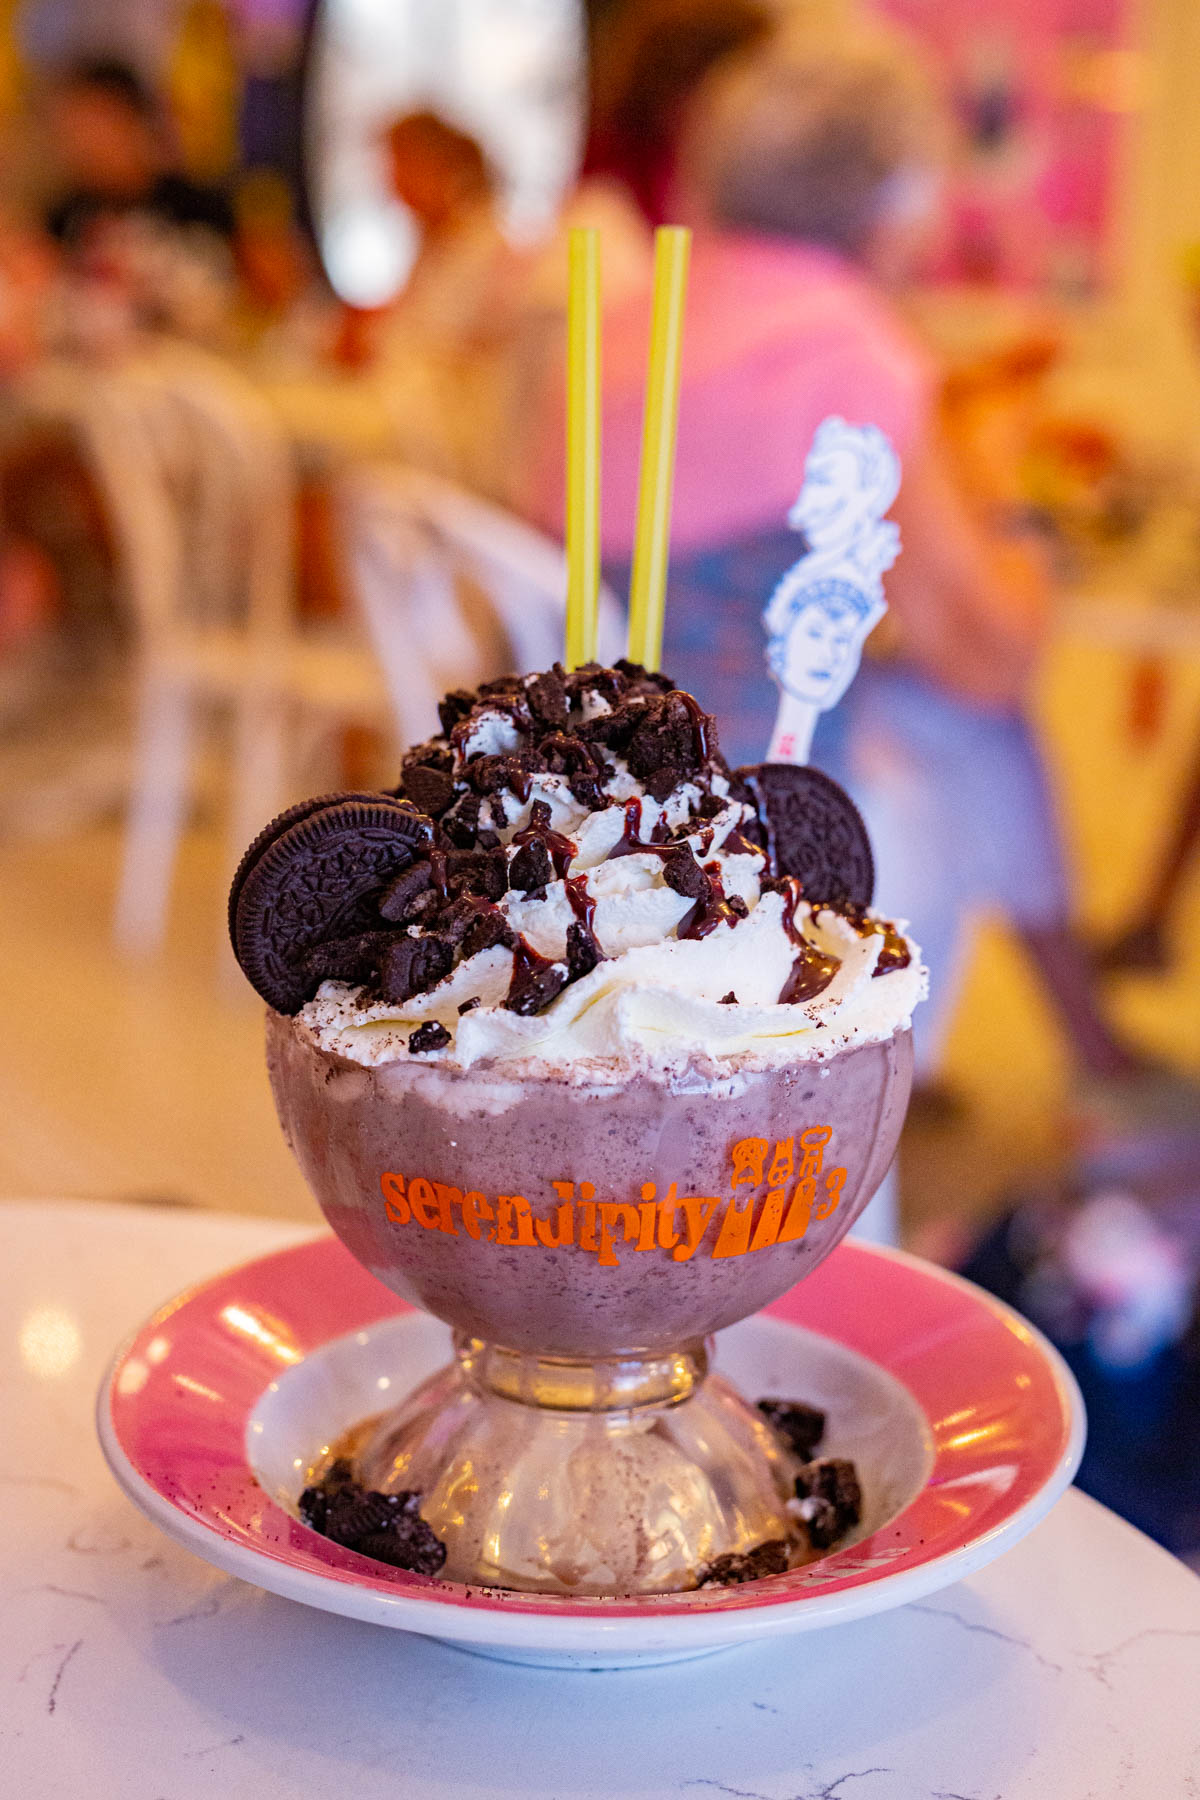 Serendipity 3 hot chocolate, things to do in New York City with teens
kid-friendly desserts in NYC